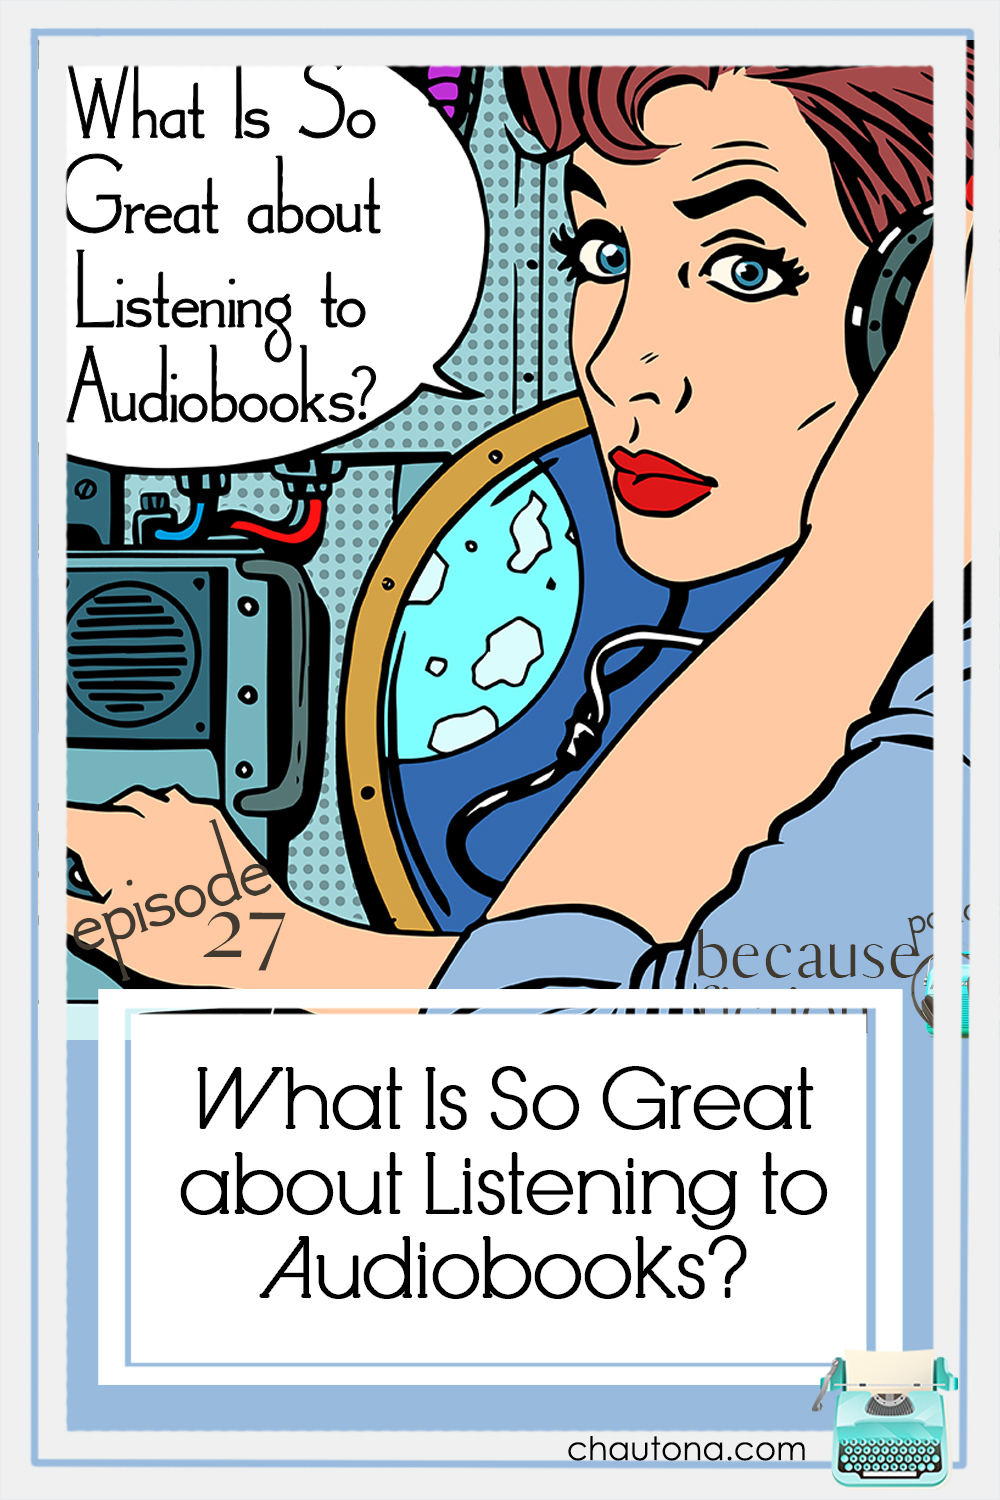 What Is So Great about Listening to Audiobooks?